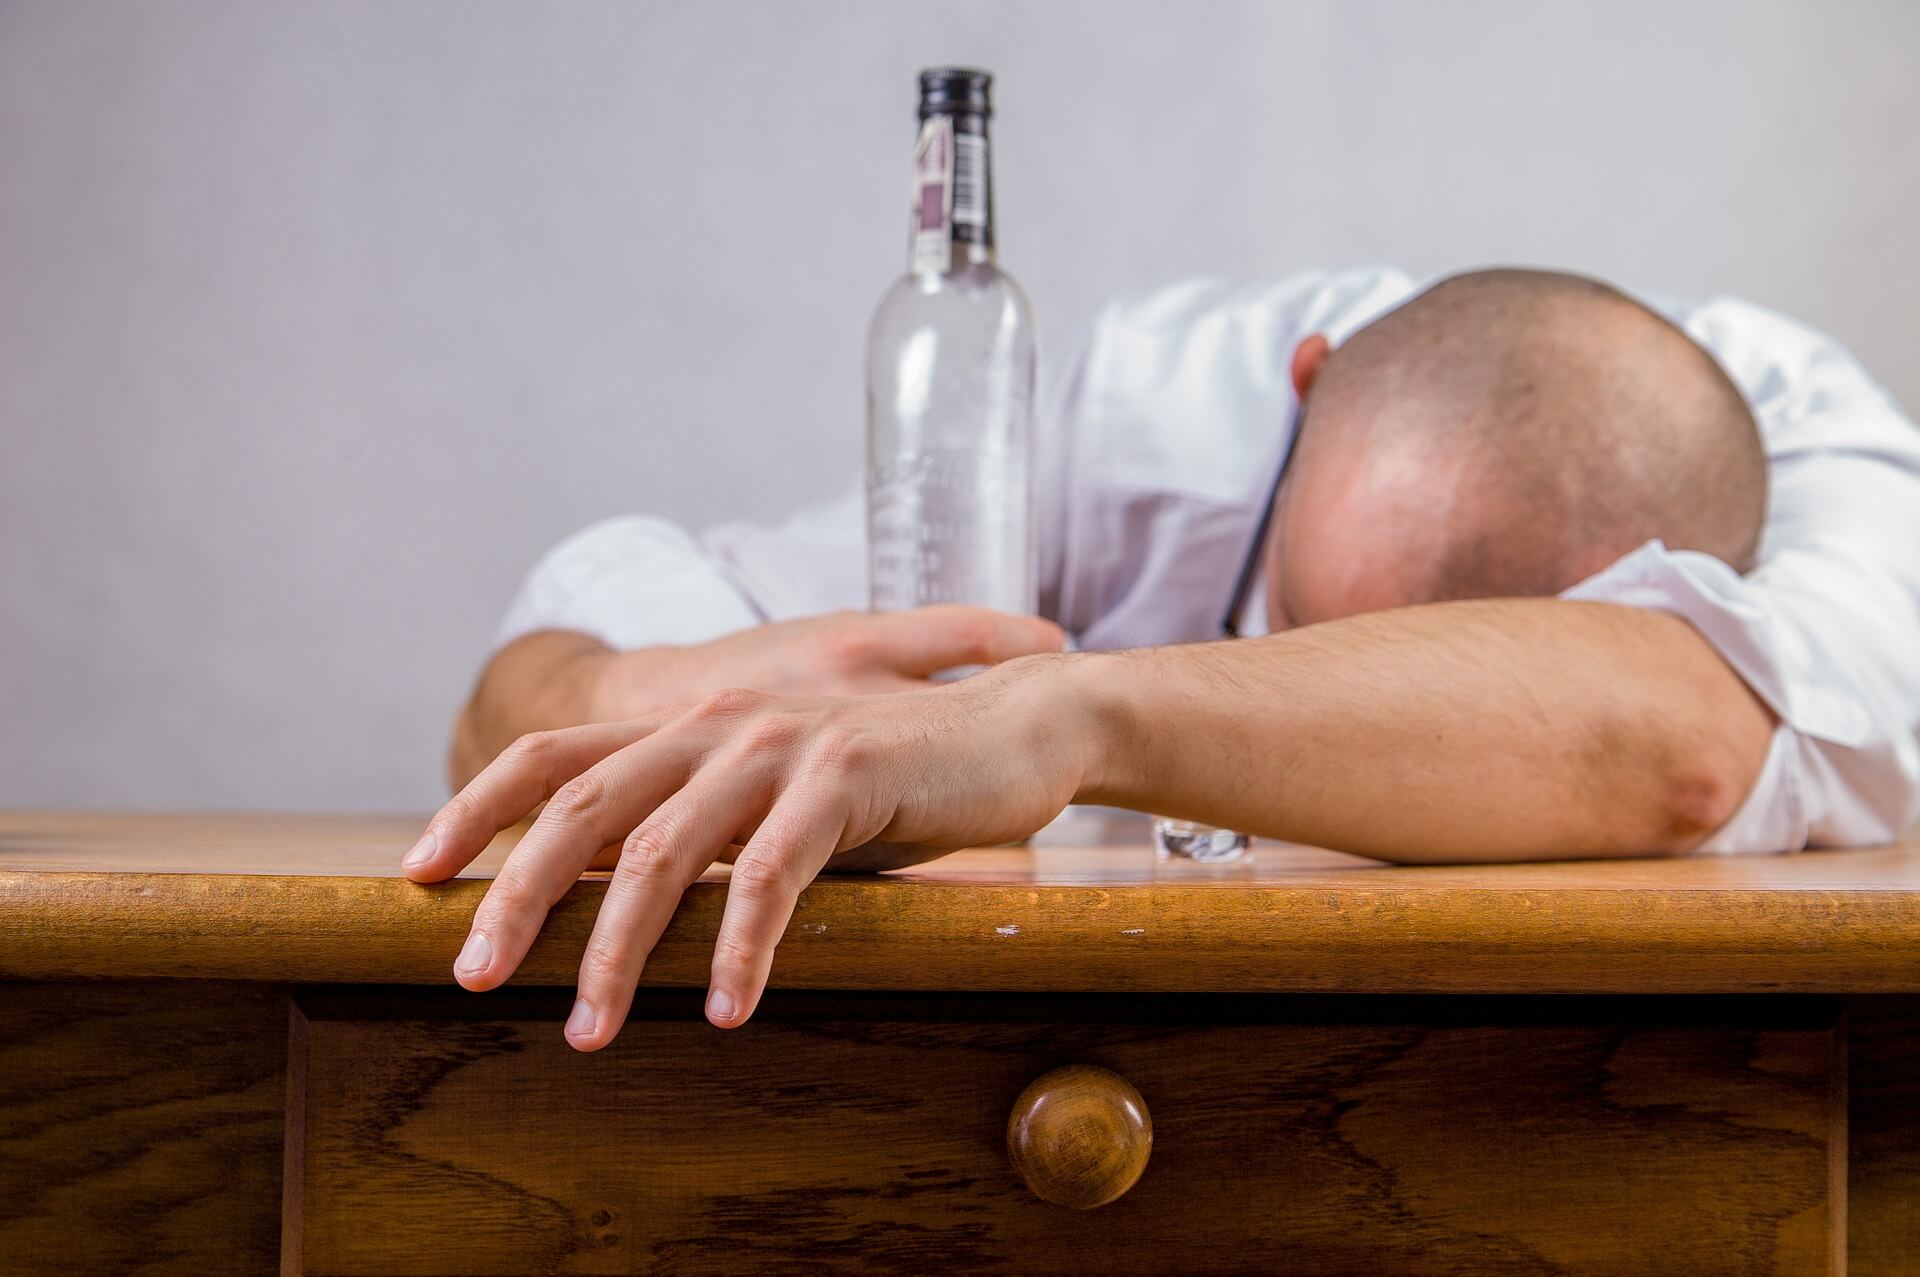 The Connection Between Alcoholism and Insomnia